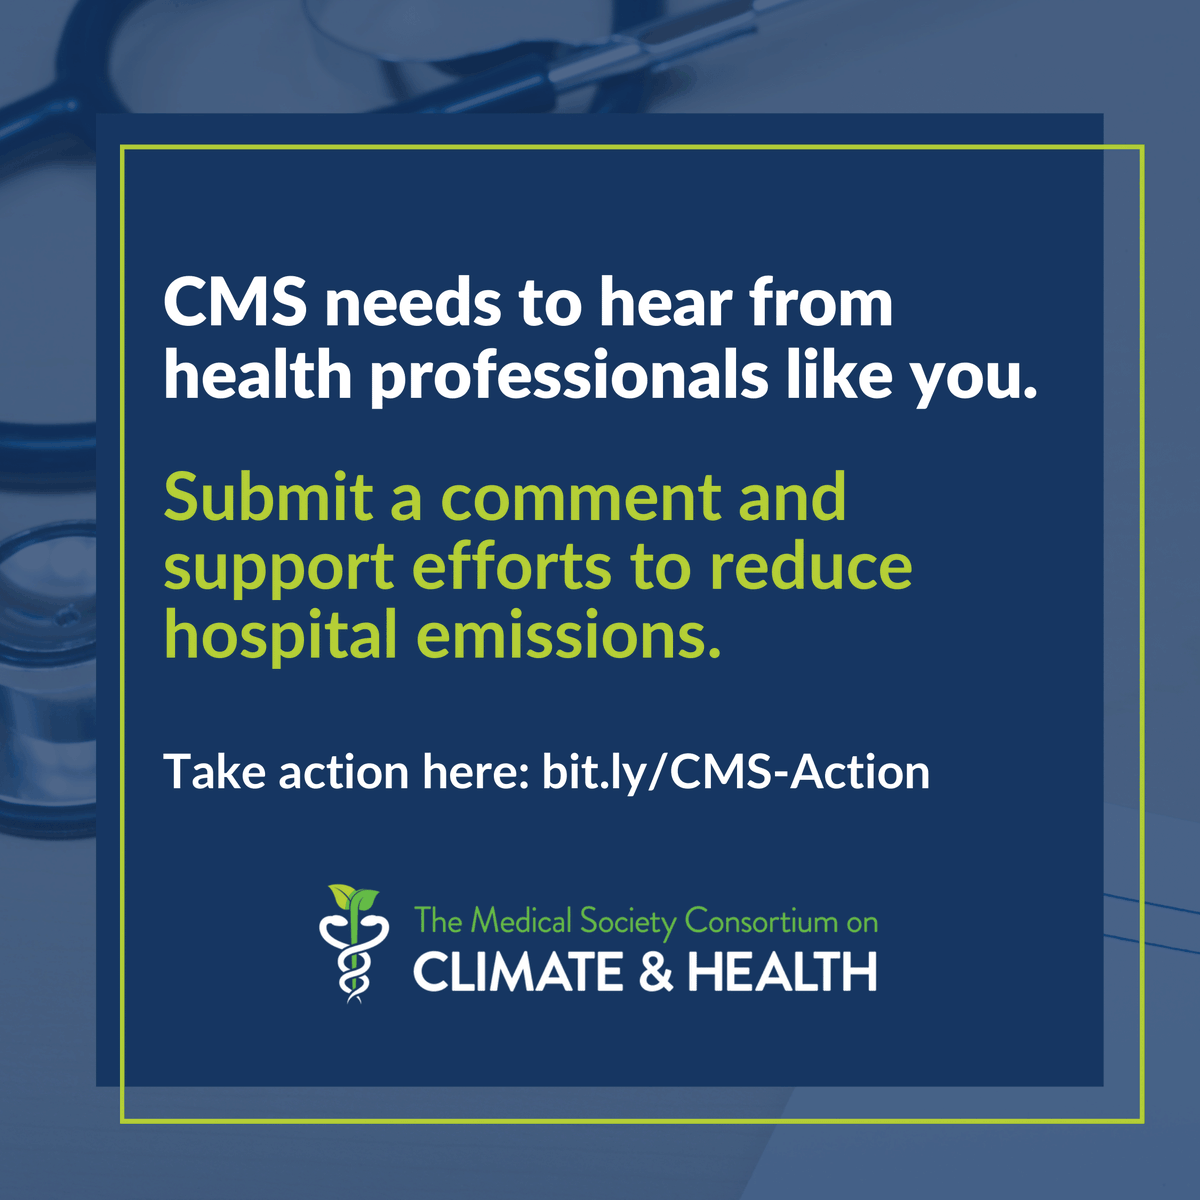 🚨 Action Alert 🚨 - For the first time,@CMSGov has proposed collecting, monitoring, assessing, and addressing hospital emissions. Share your support for this important decarbonization initiative by easily submitting a comment here before June 10th: bit.ly/CMS-Action